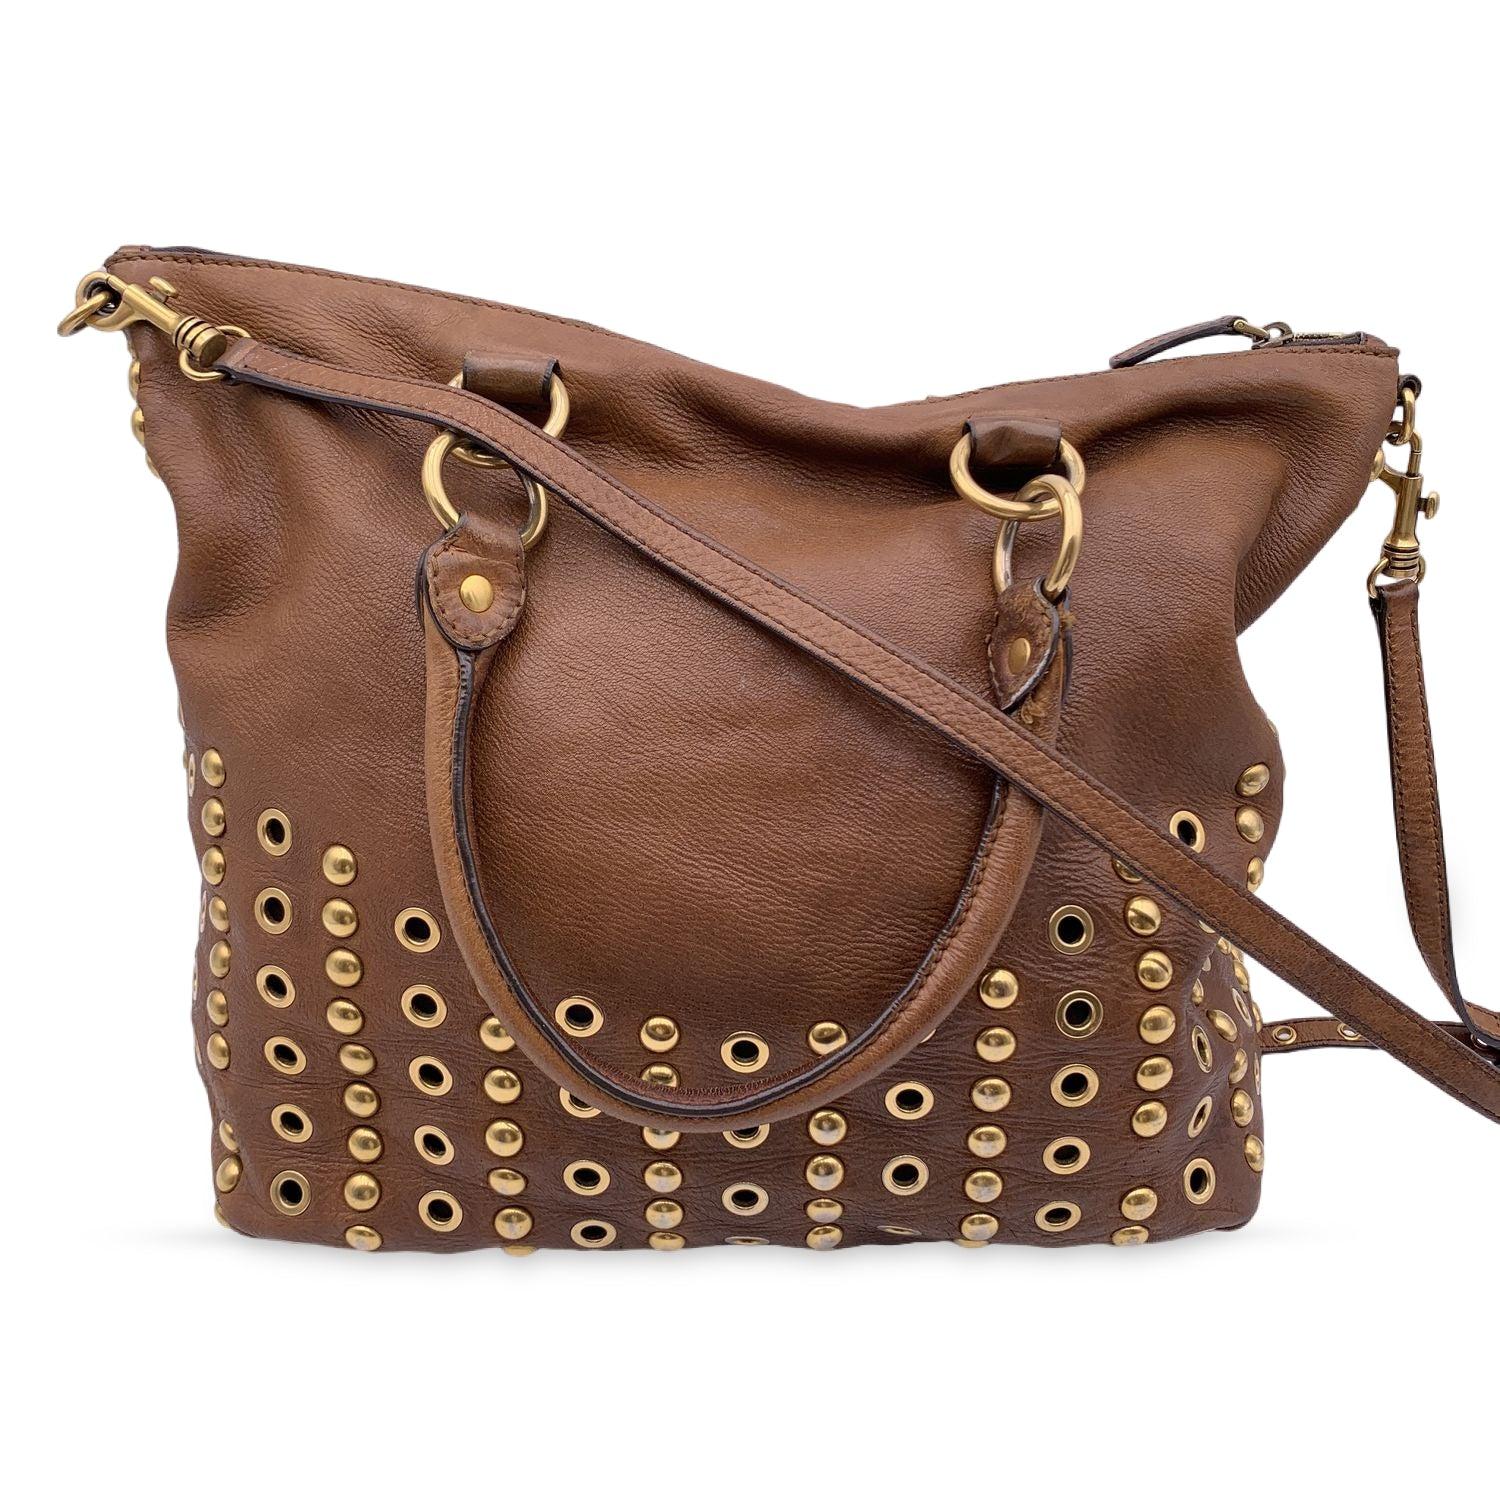 Women's Miu Miu Brown Leather Studded Tote Bag with Shoulder Strap